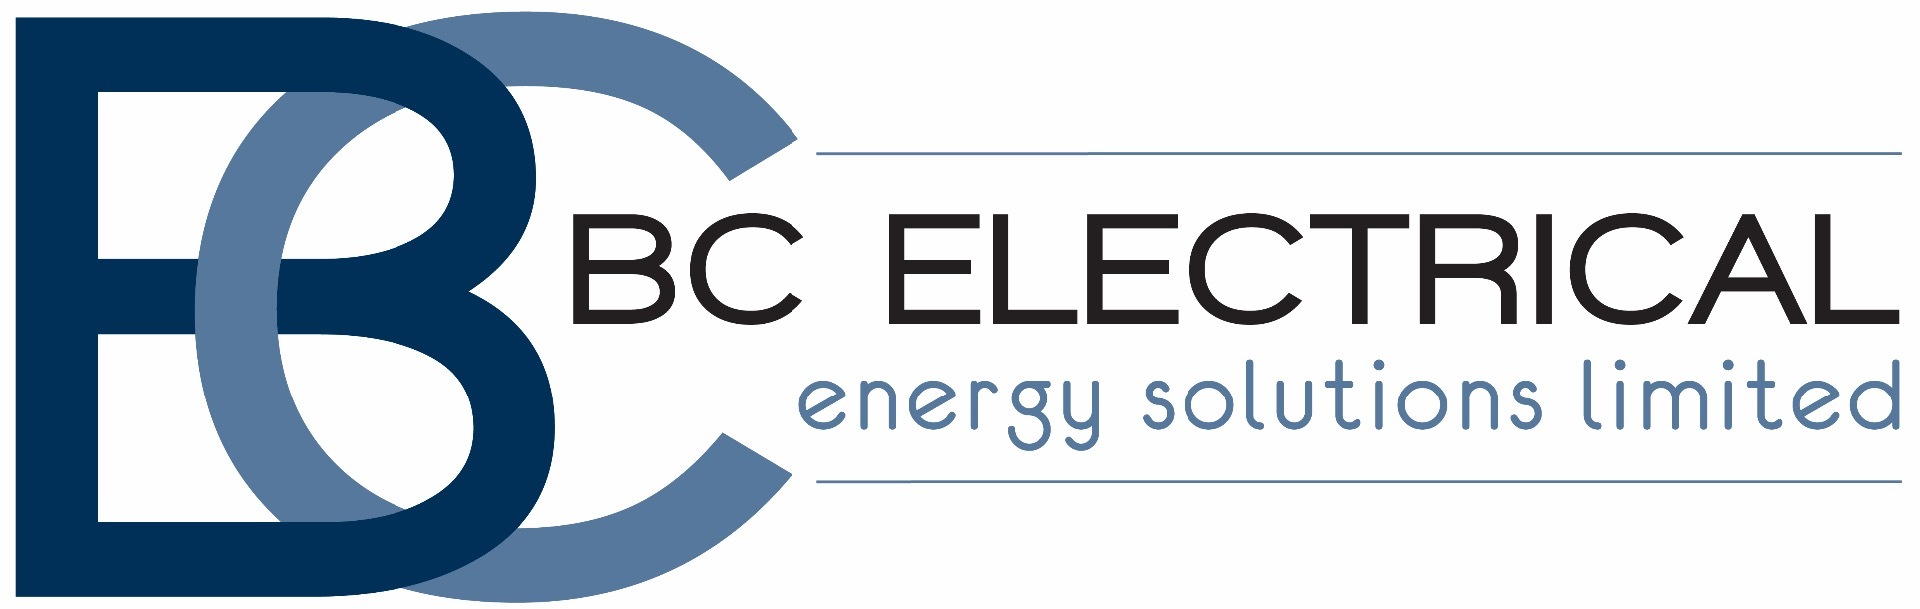 B C Electrical Services in Corby - Electrical contractors for industrial and commercial premises